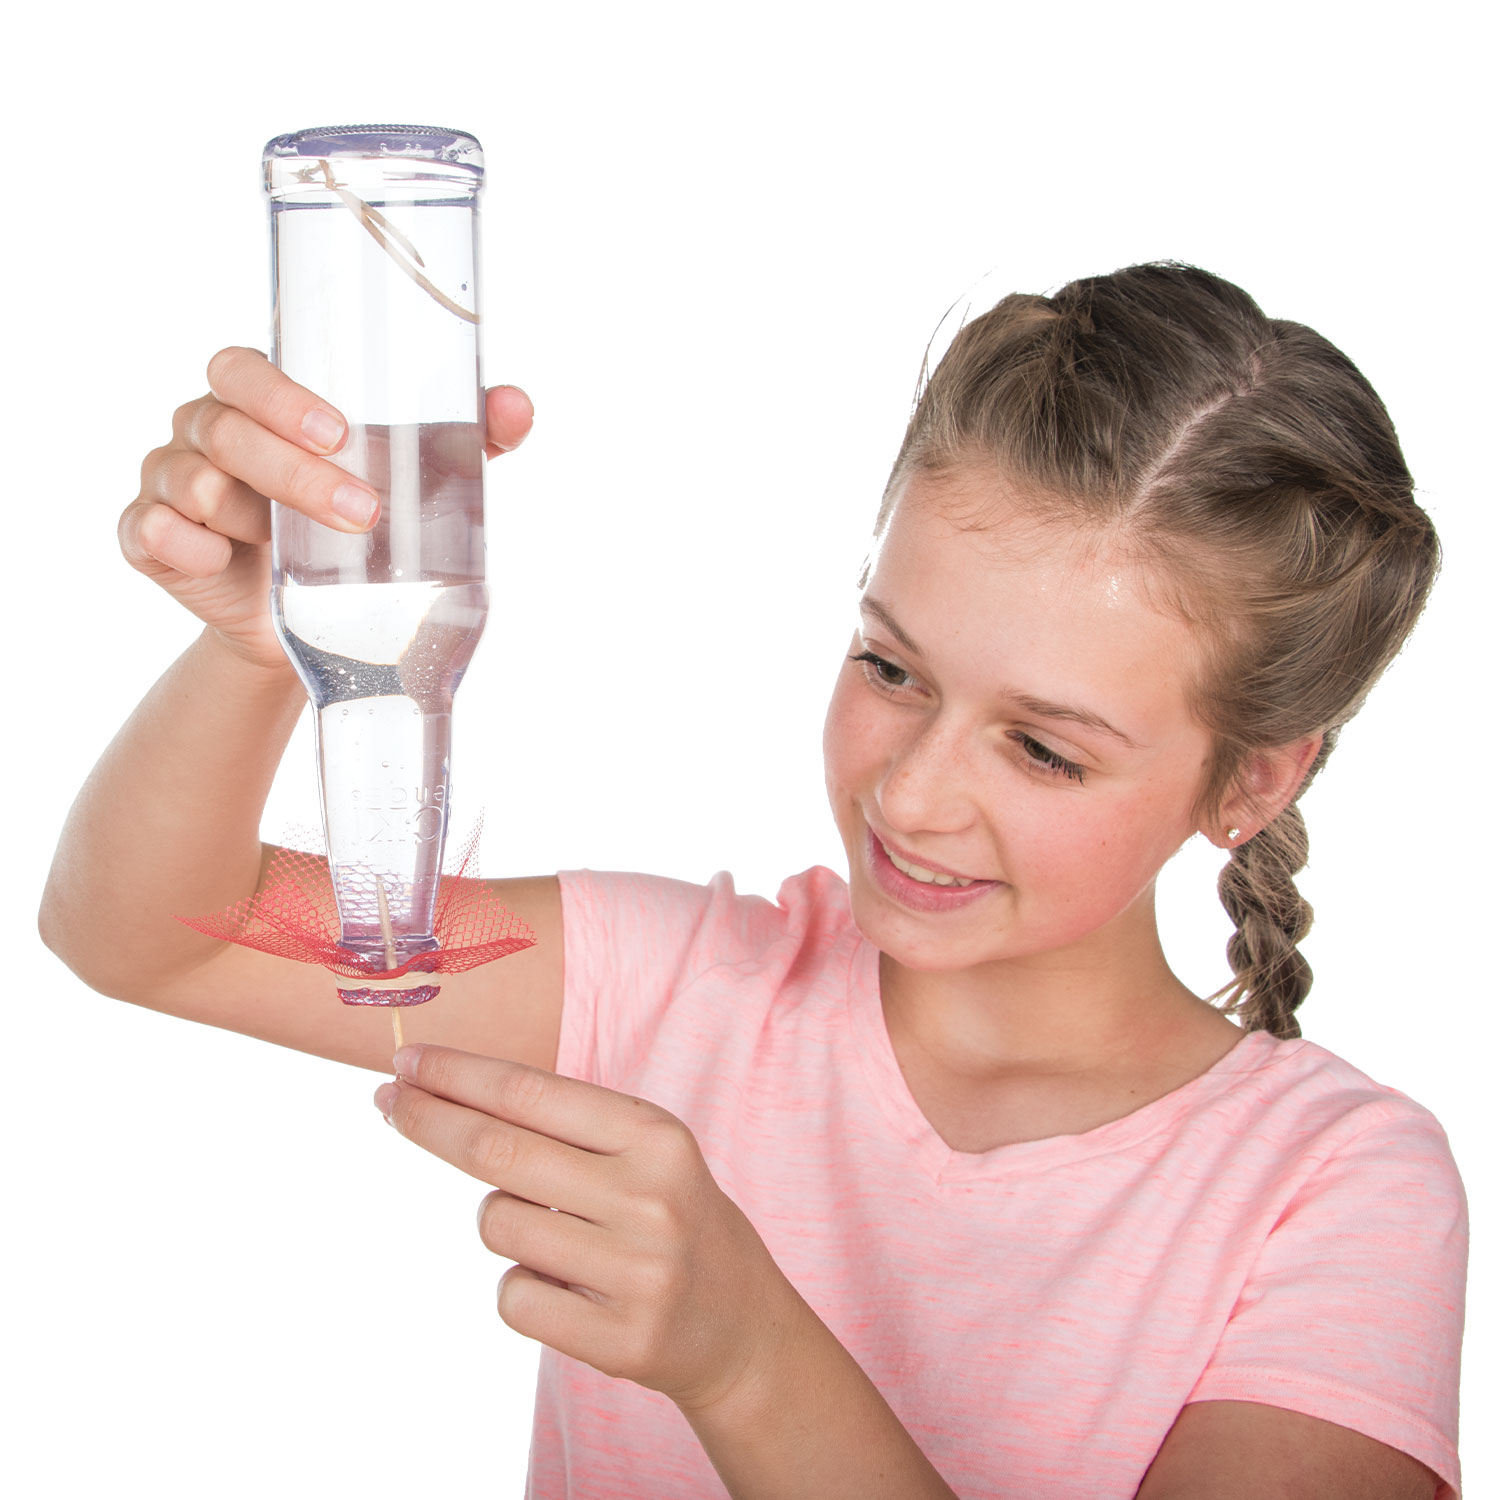 At Home Science - Water Suspension